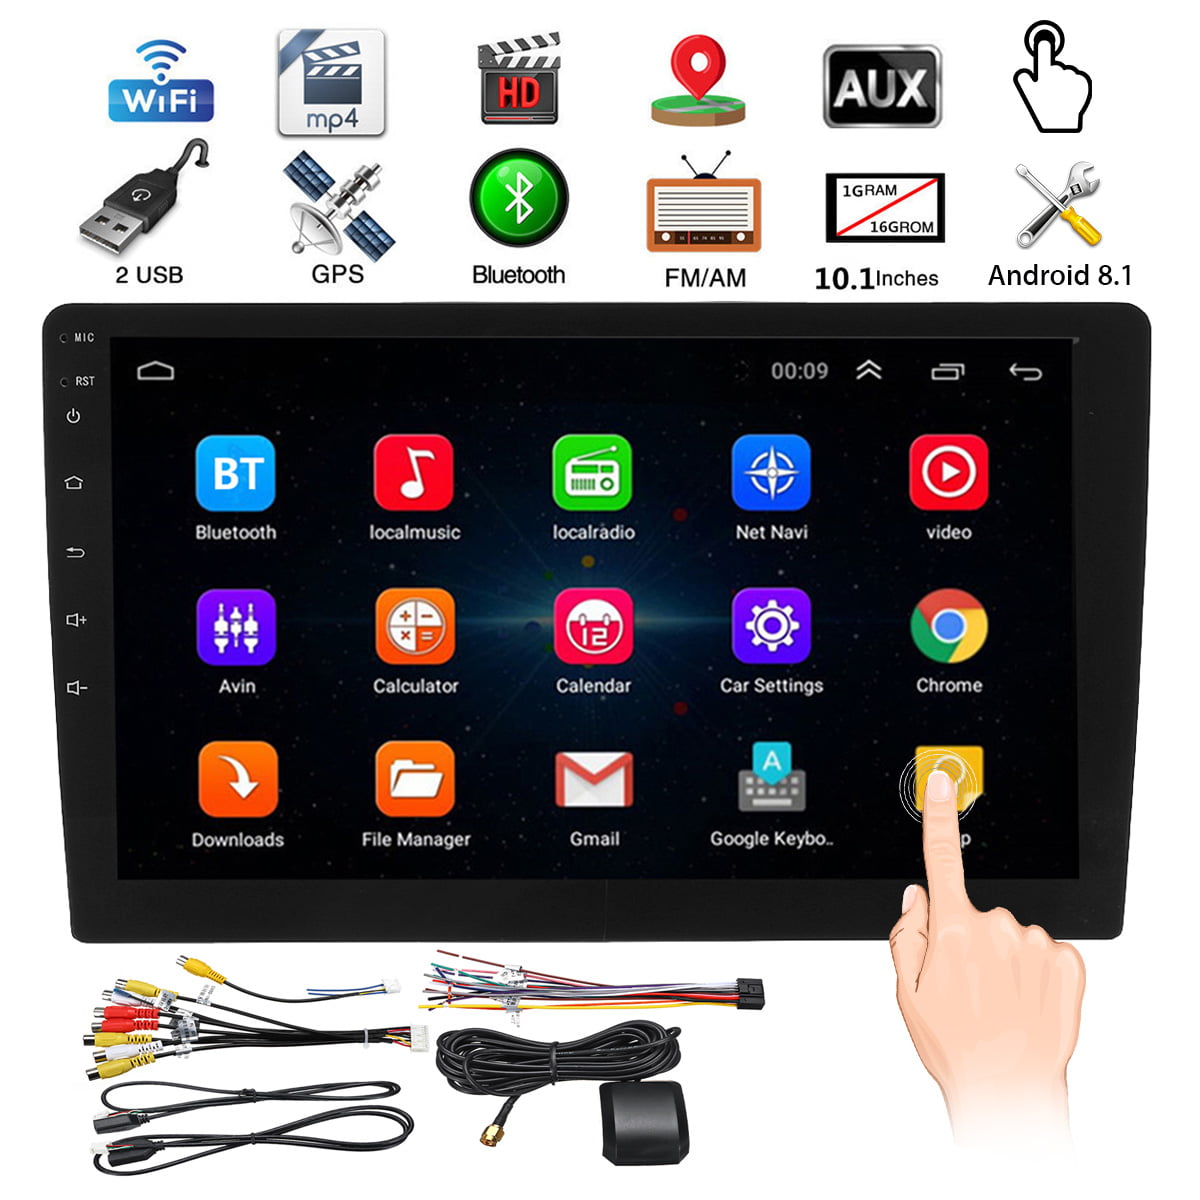 Moligh doll 10.1 Android 8.1 Dual 2Din Car Stereo Radio MP5 Multimedia Player with GPS Wifi OBD2 MirrorLink Player with Camera